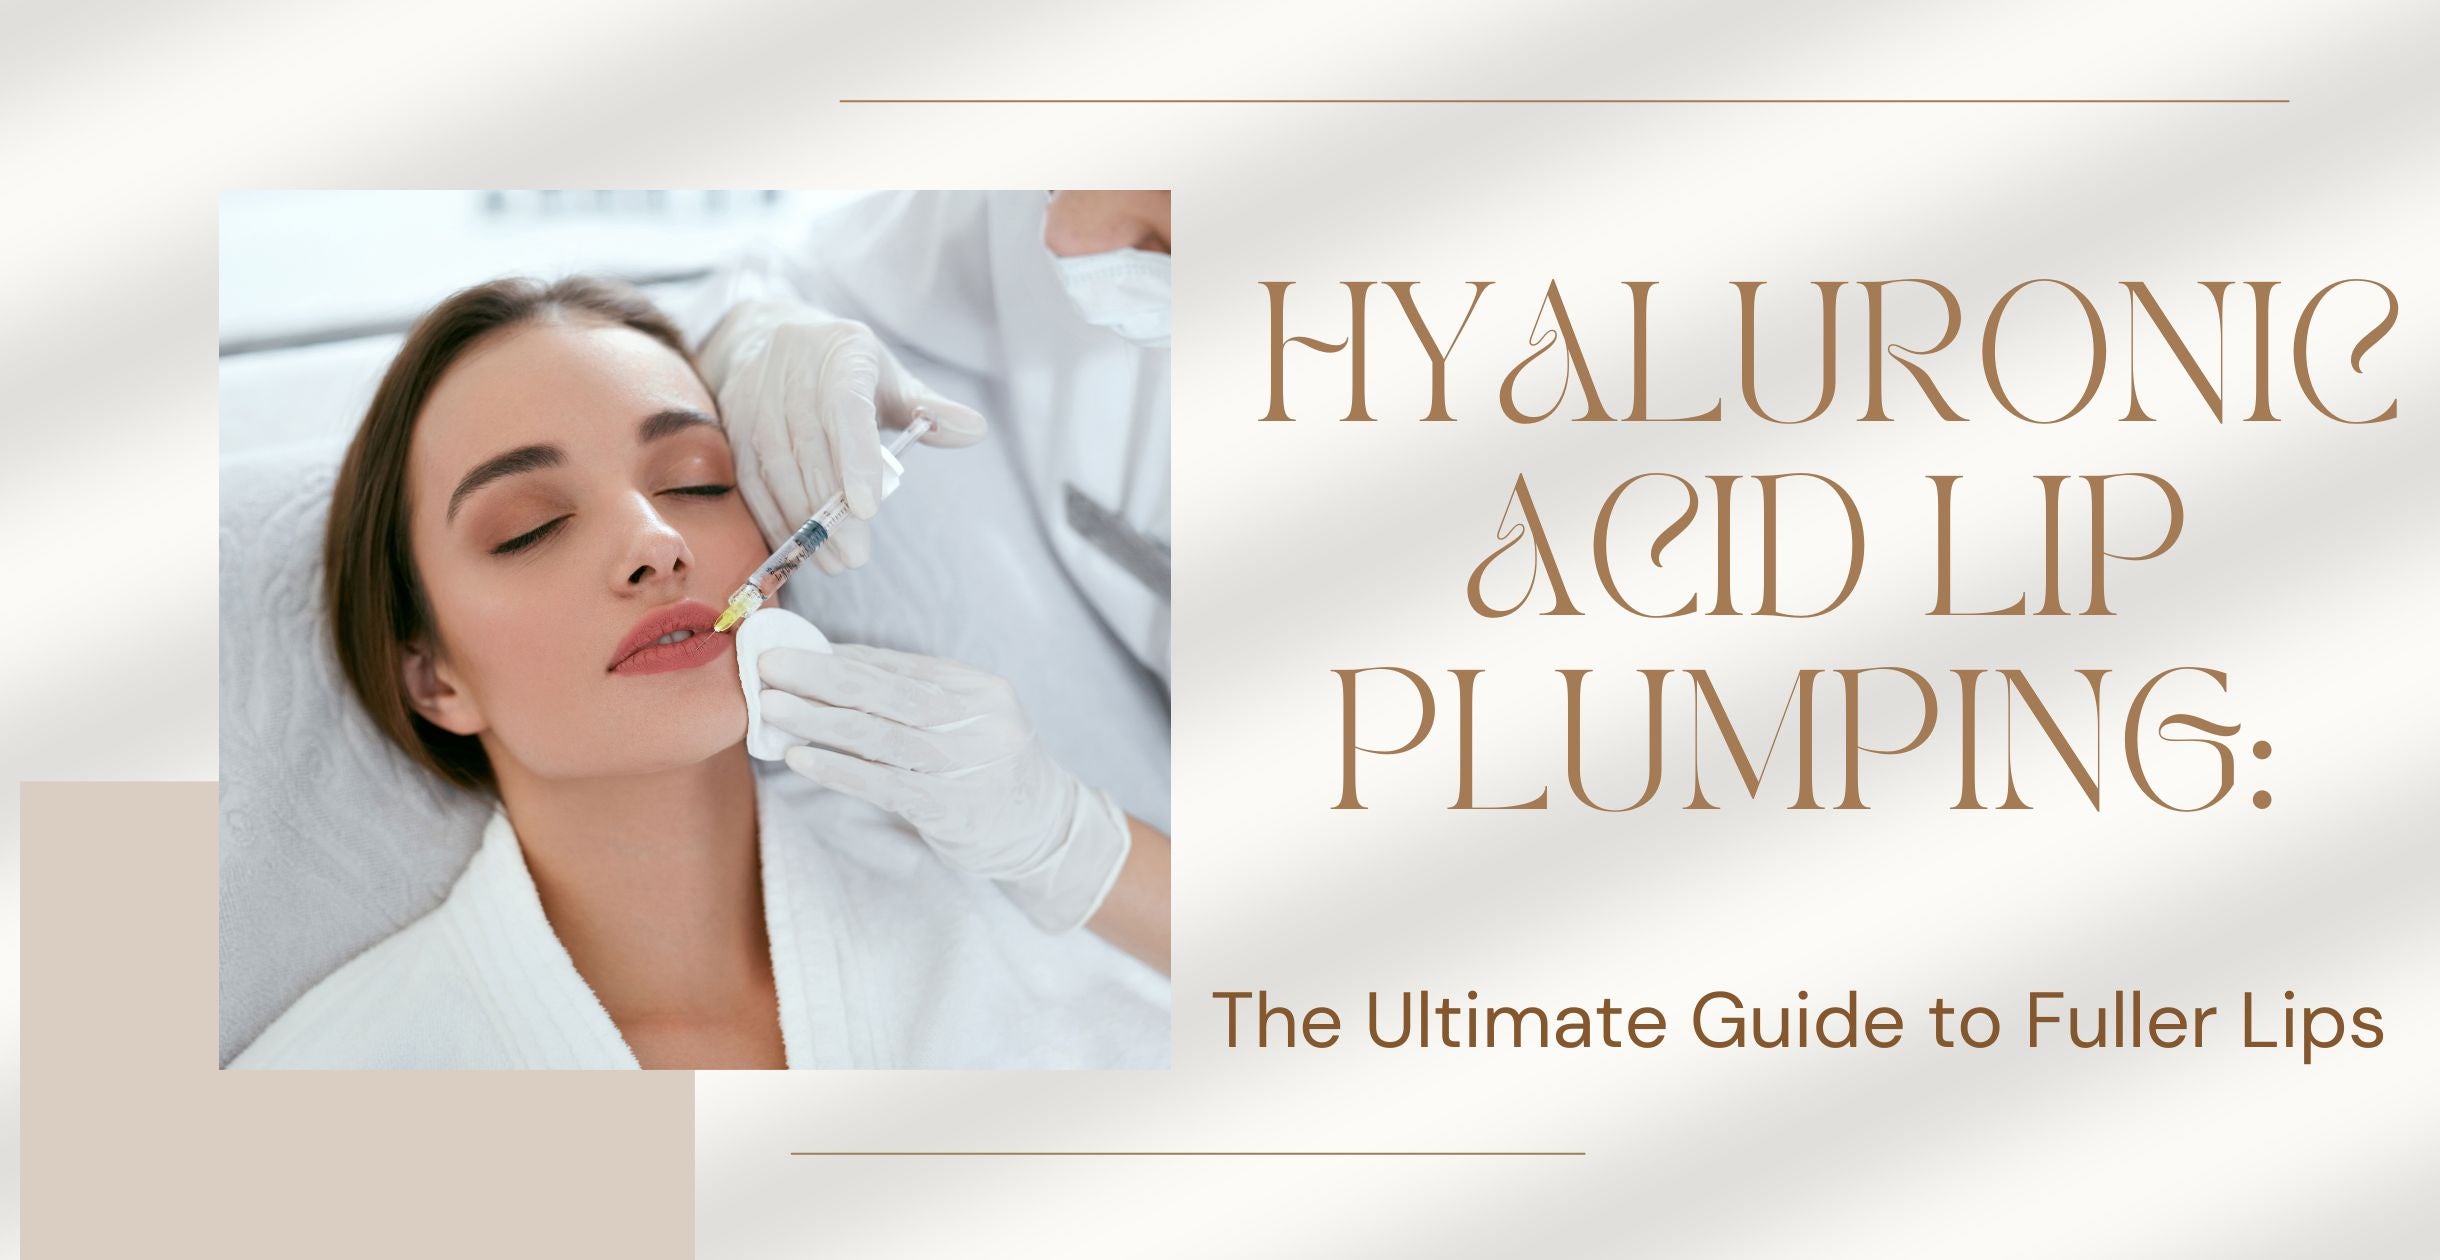 Hyaluronic Acid Lip Plumping: The Ultimate Guide to Fuller Lips